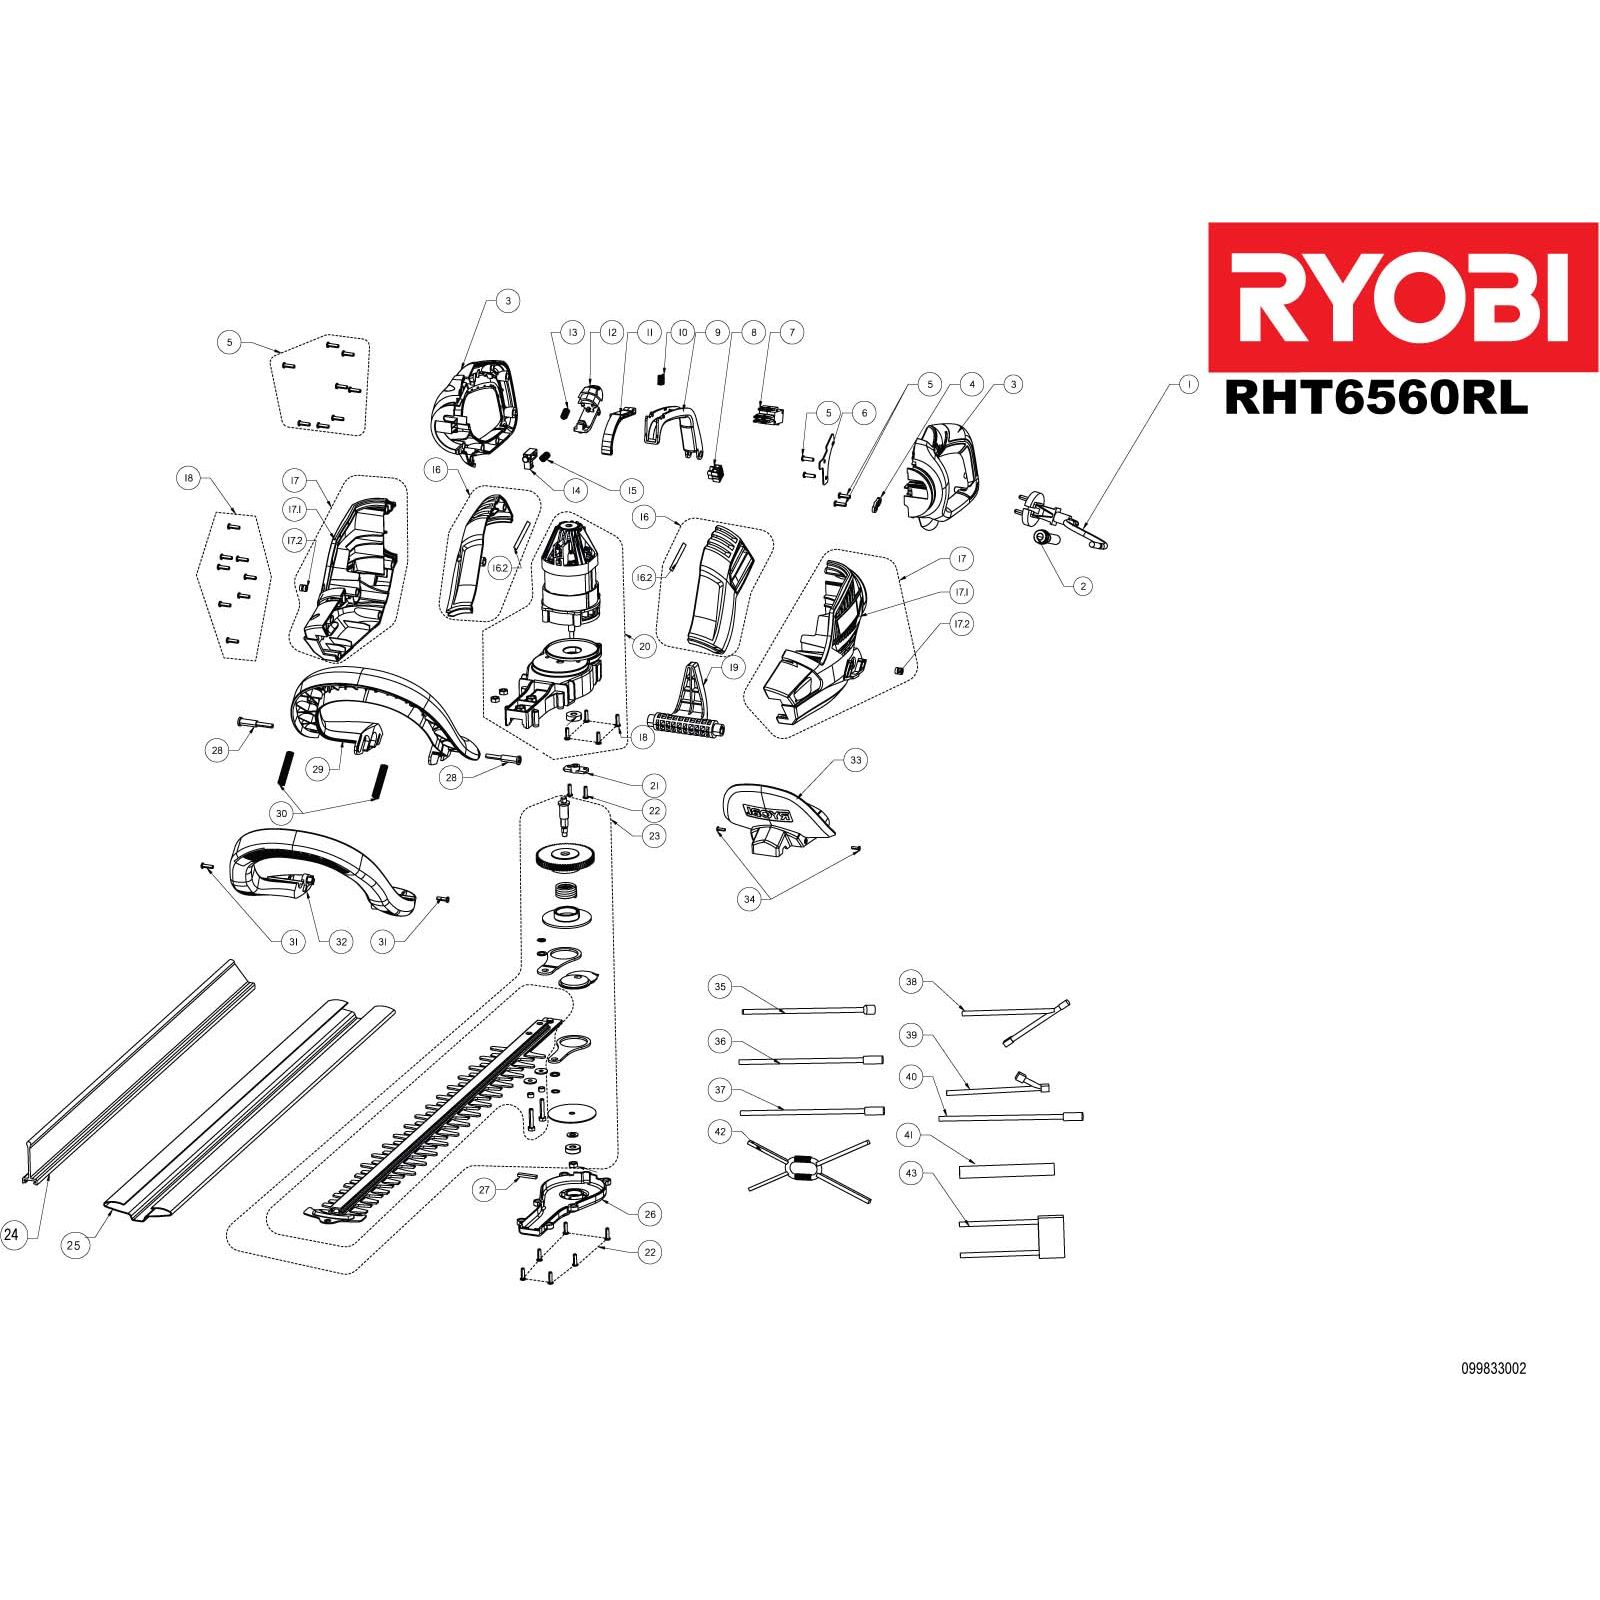 Buy A Ryobi Rht6560rl Spare Part Or Replacement Part For Your Hedge